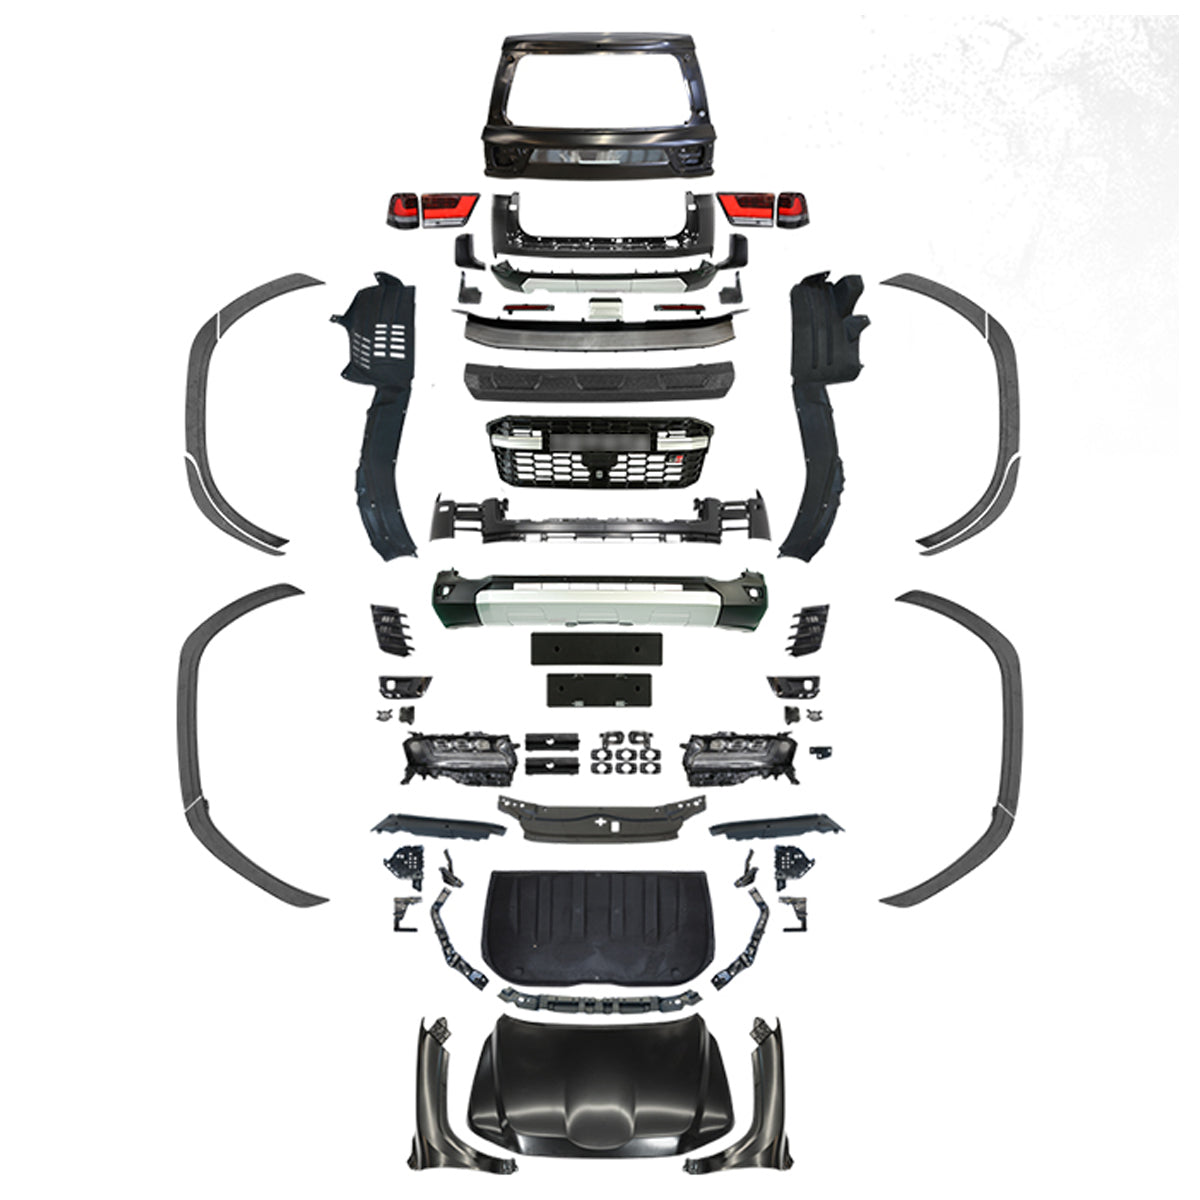 THE BODY KIT FOR LAND CRUISER LC200 2008-2021 UPGRADE TO LC300 2022 GR STYLE